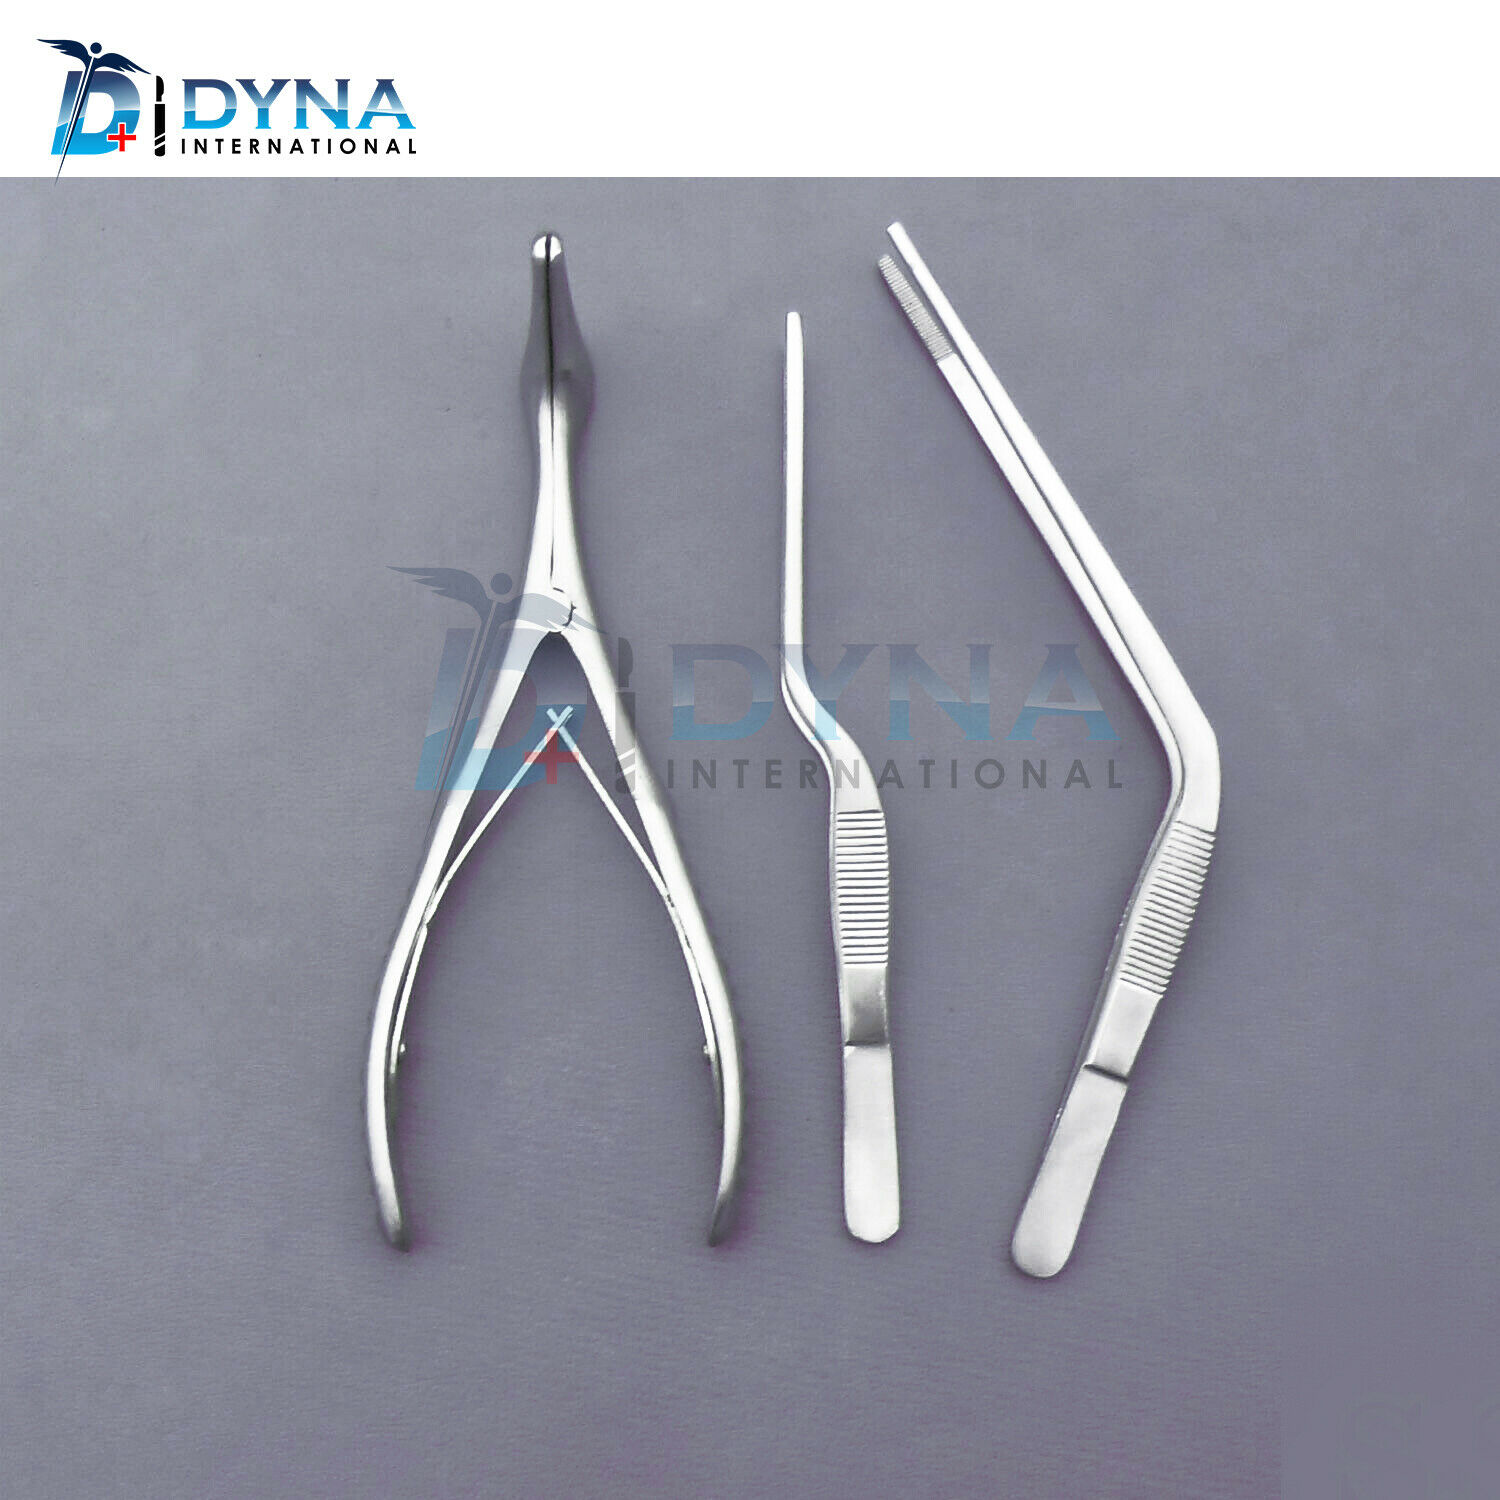 epistaxis-set-adult-nasal-forceps-instruments-stainless-steel.jpg